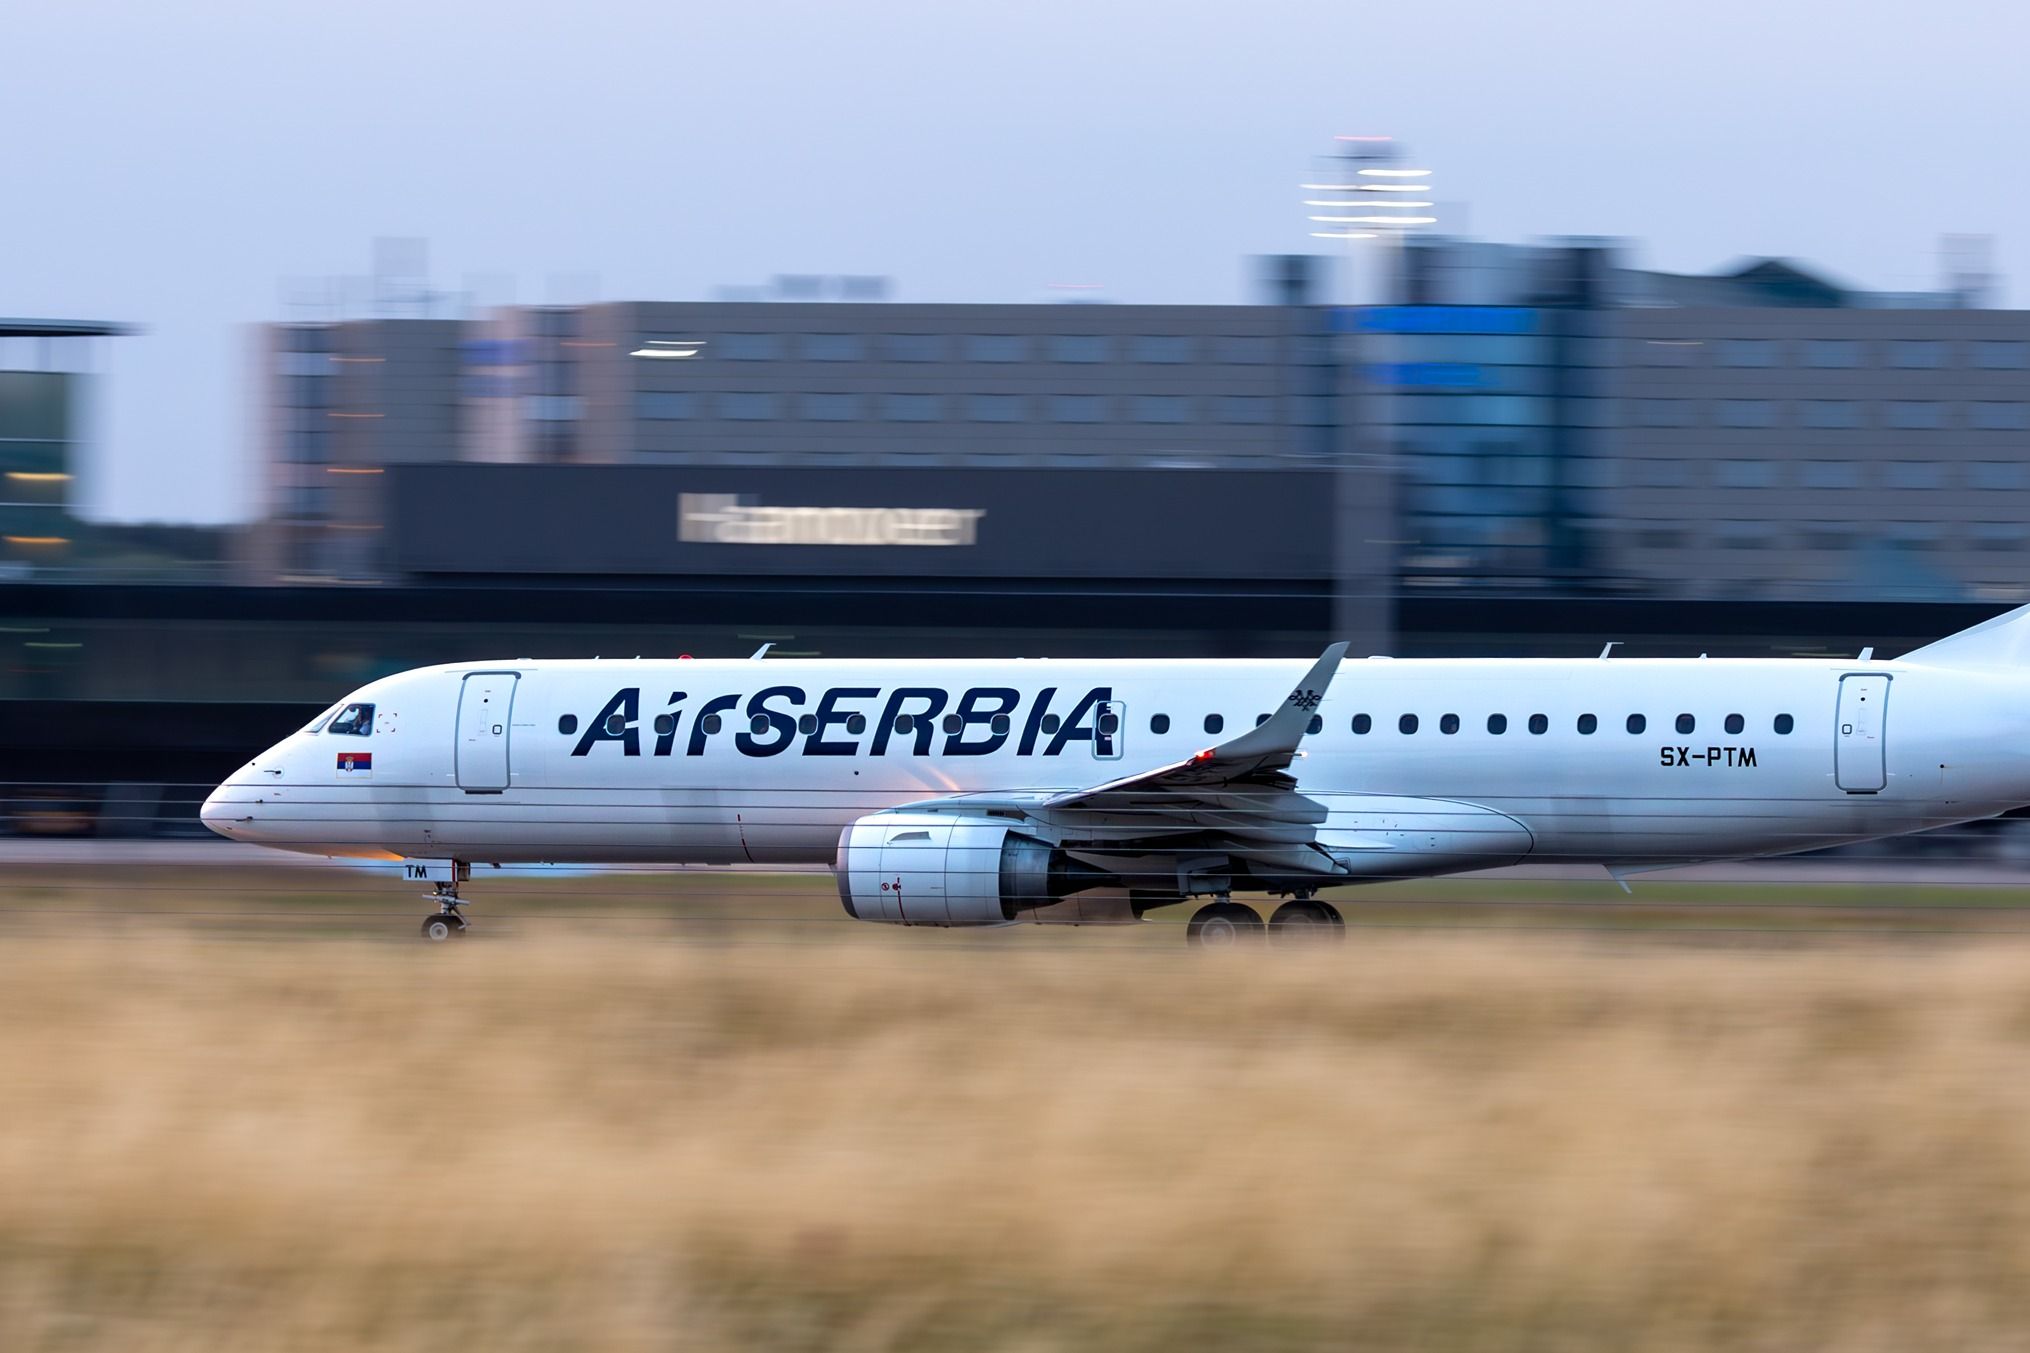 Air Serbia Embraer E195 taking off shutterstock_2325539991